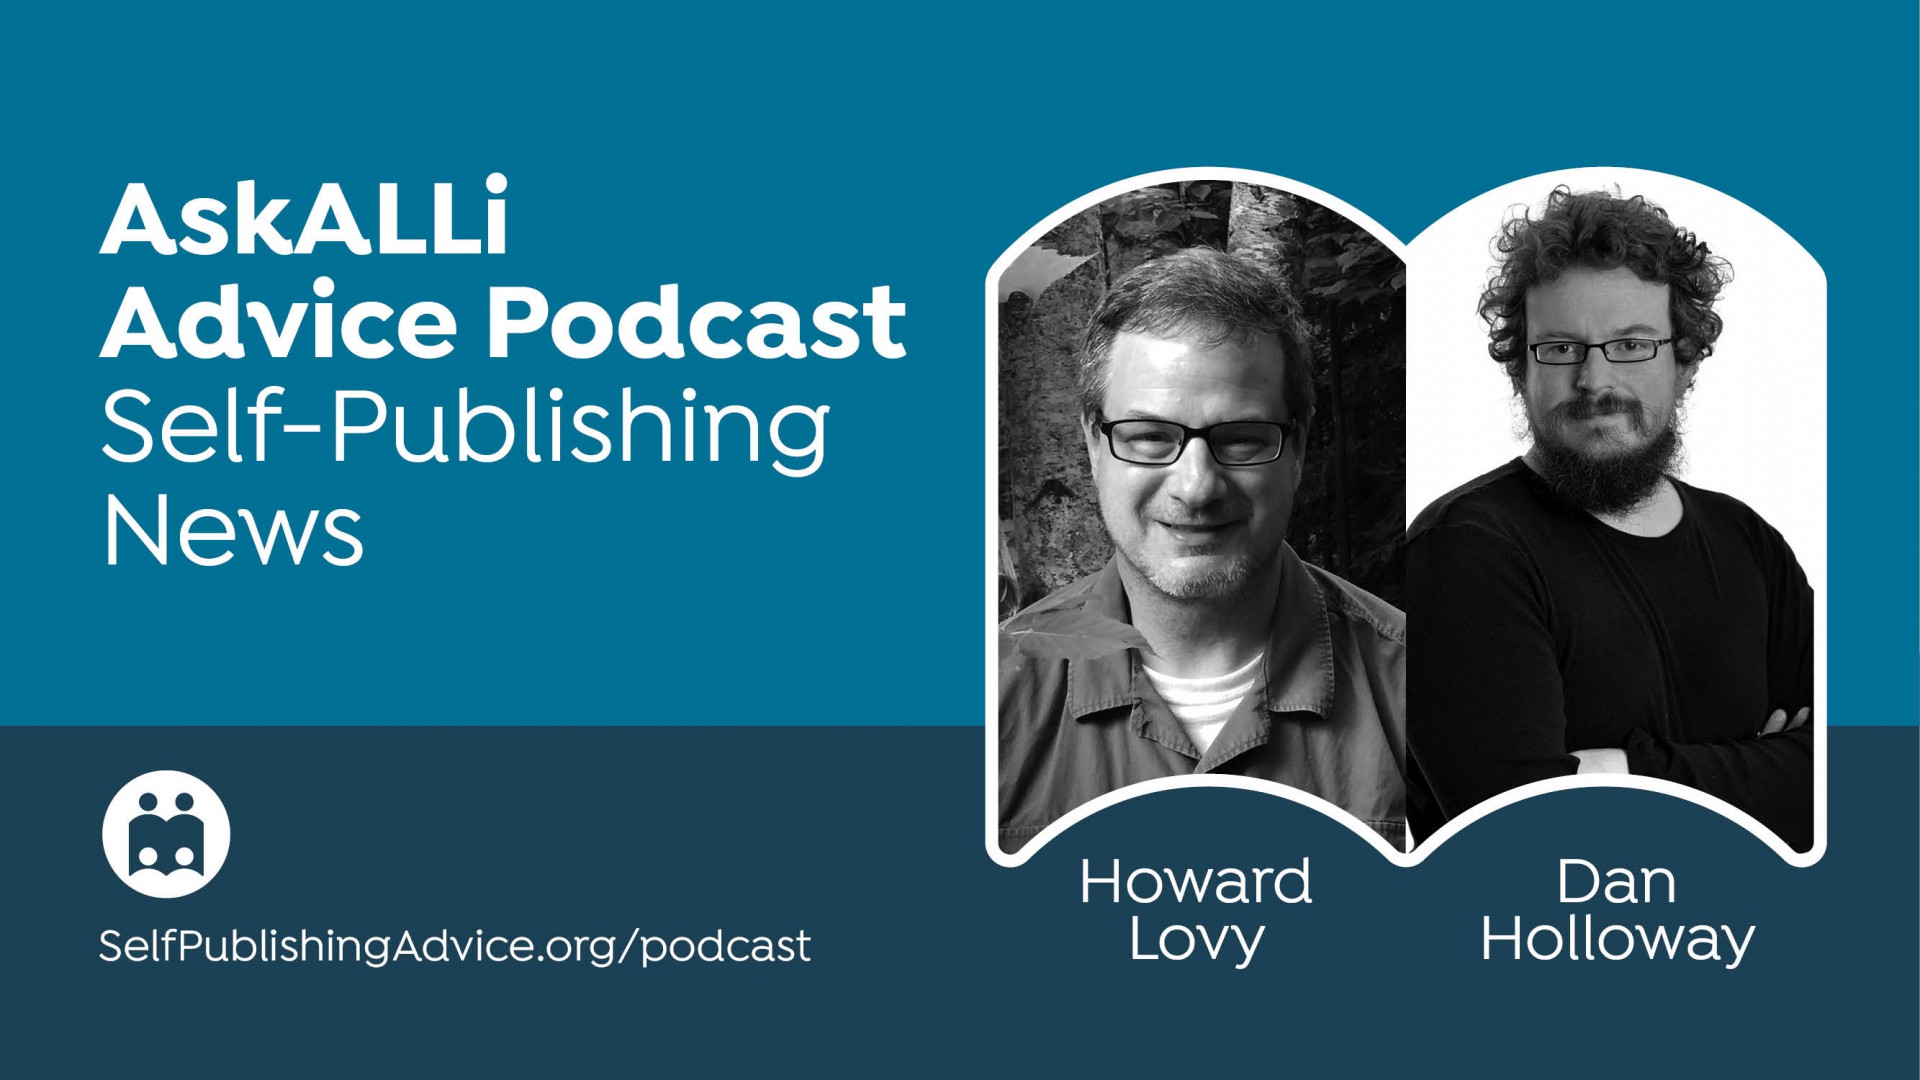 Findaway Voices Steps In For Indies In Wake Of Audiblegate: Self-Publishing News Podcast With Dan Holloway And Howard Lovy